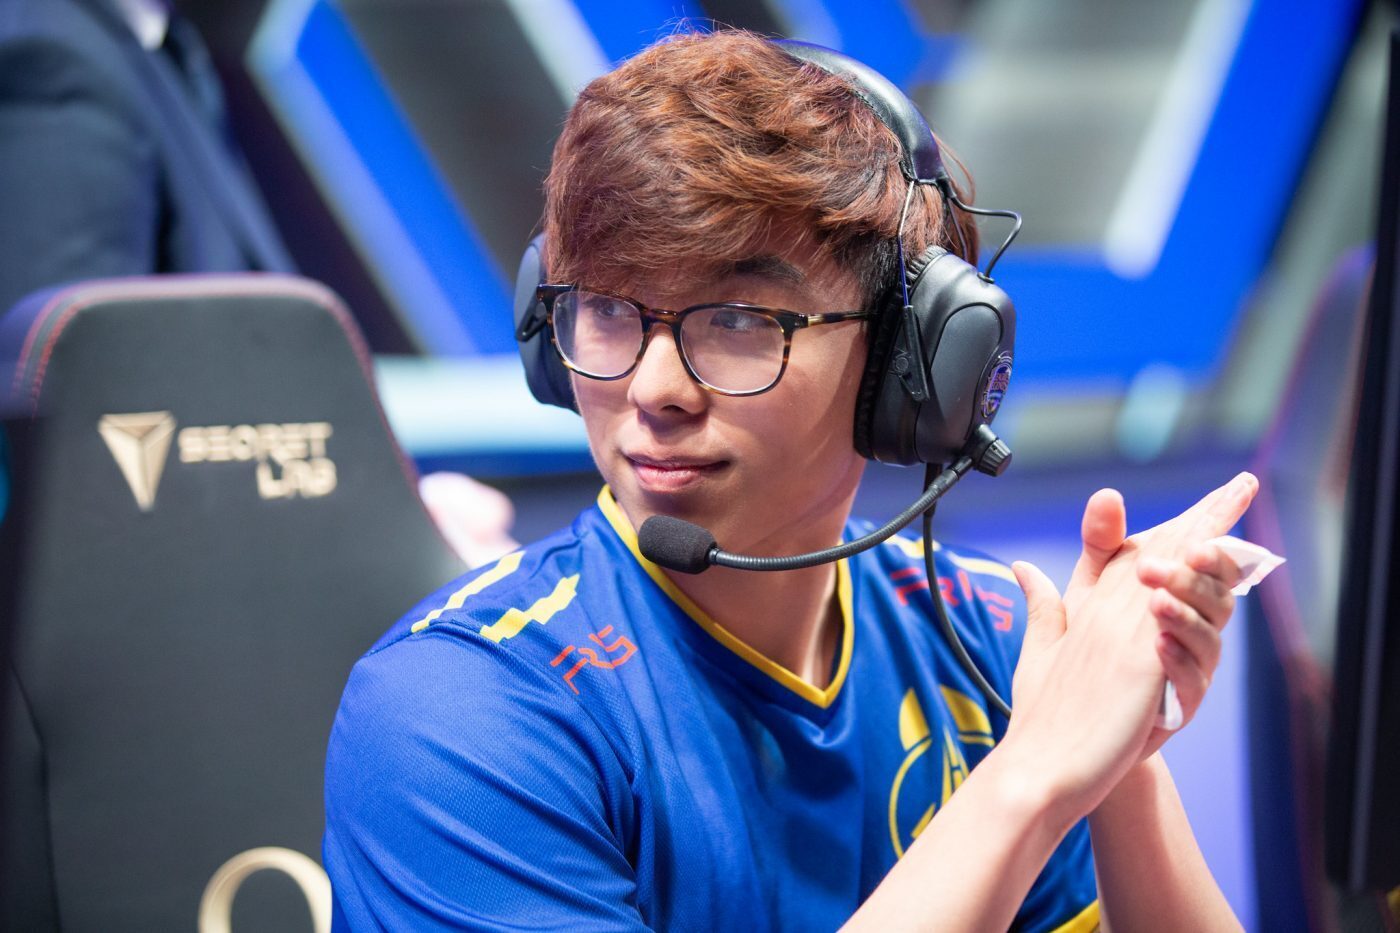 Matthew “Deftly” Chen has joined Cloud9 after a trade for Yuri “Keith” Jew (Image via Riot Games)